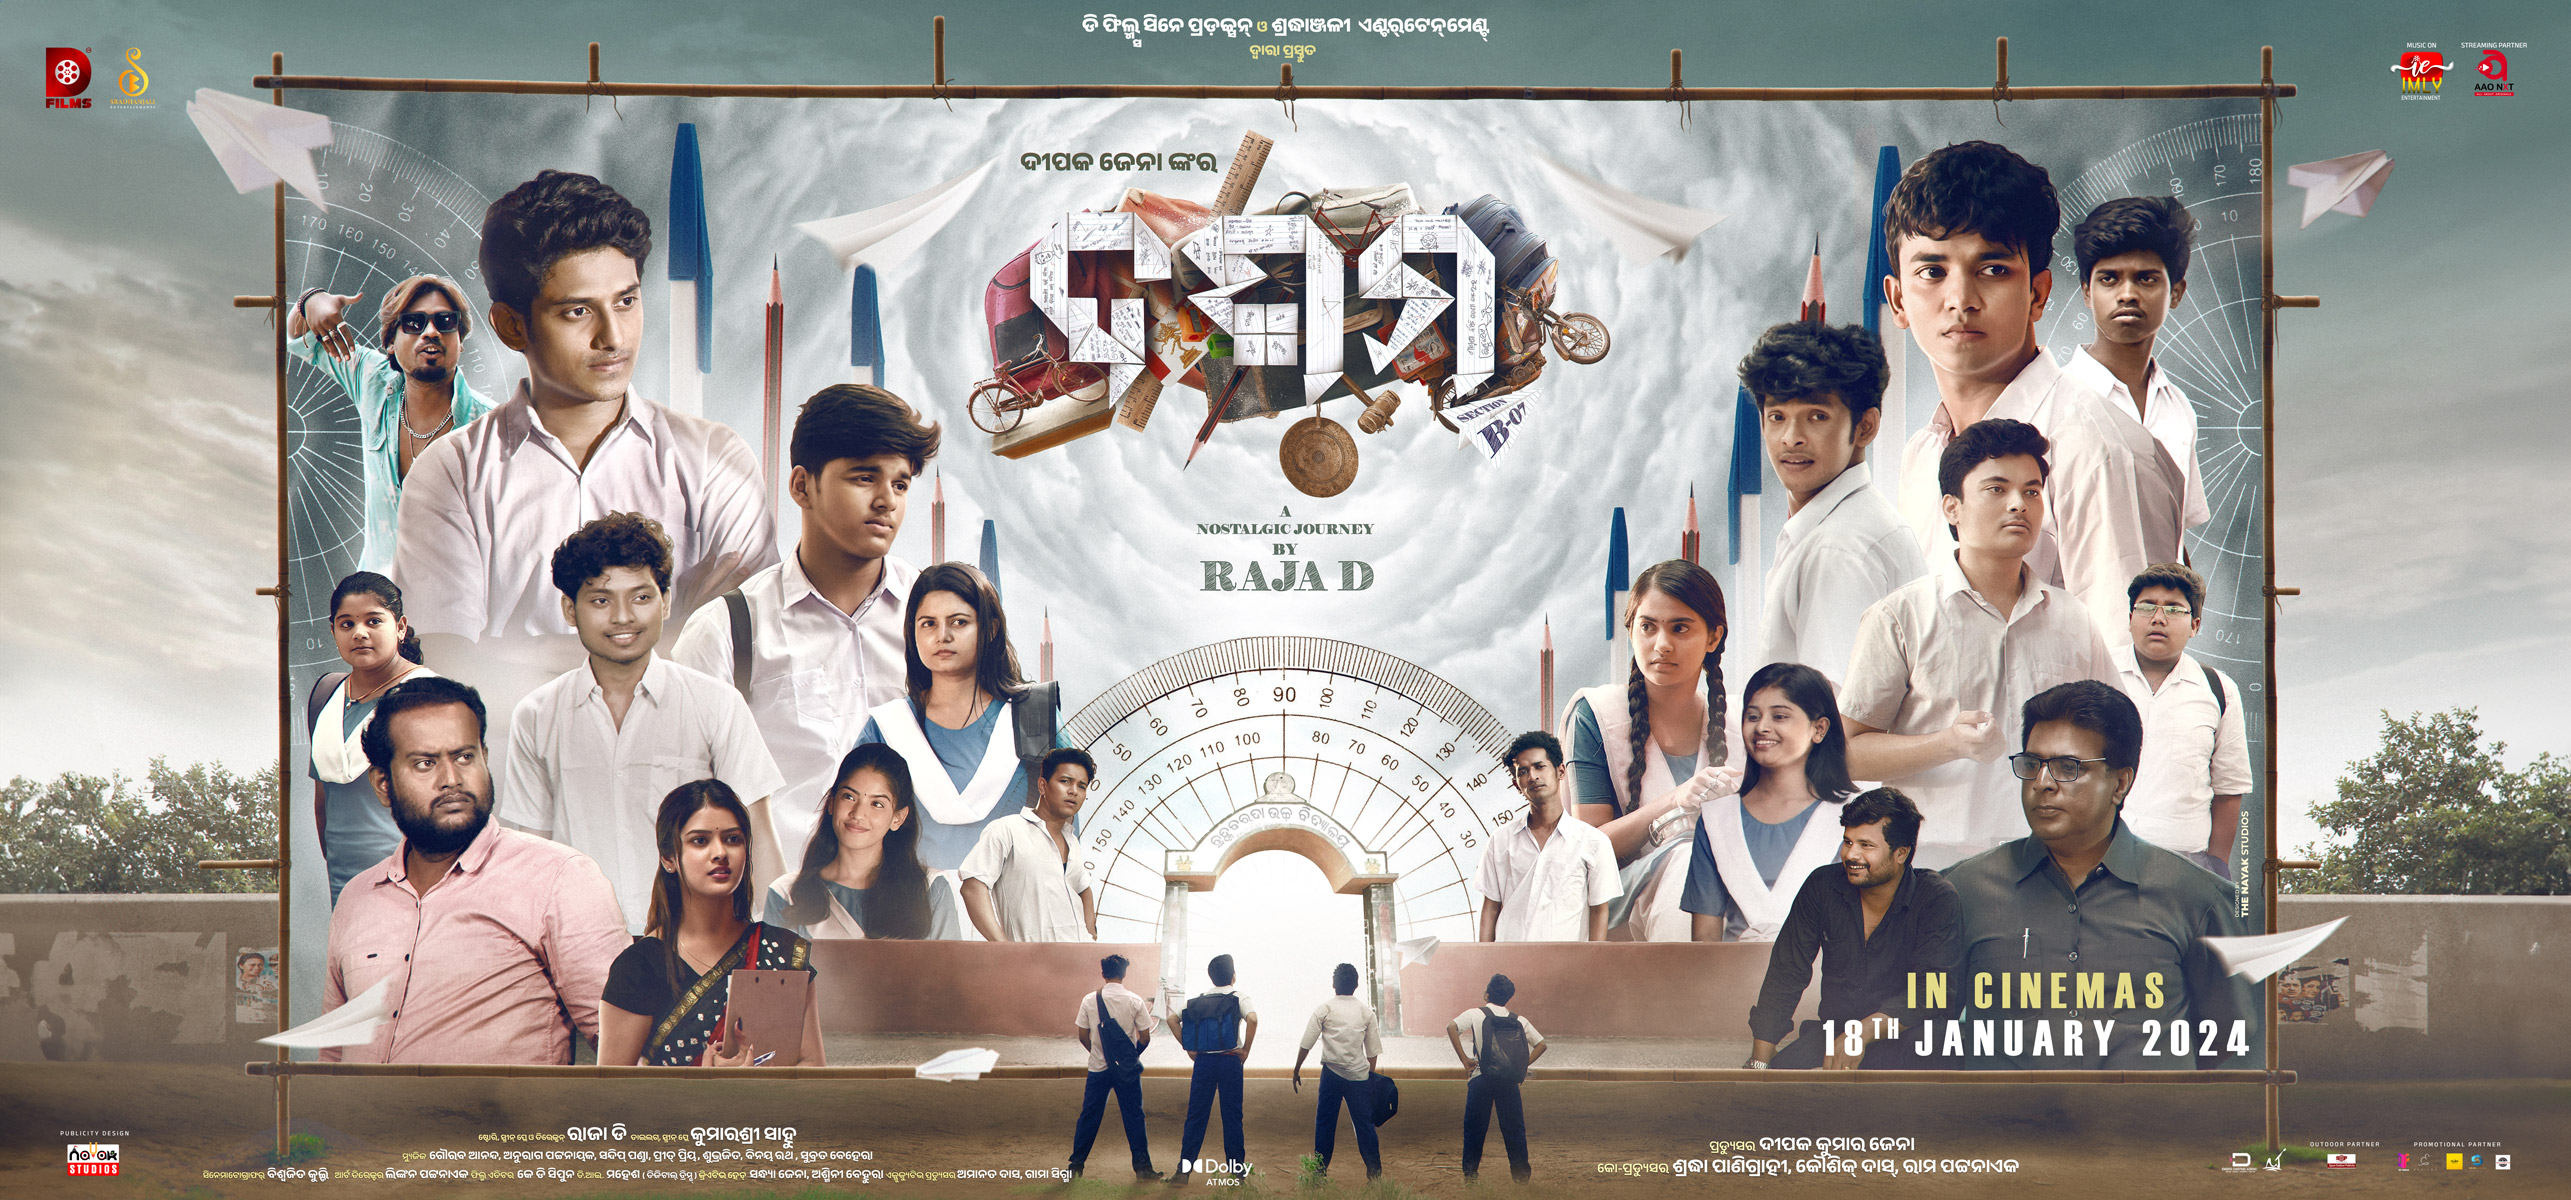 'Dasama' official poster